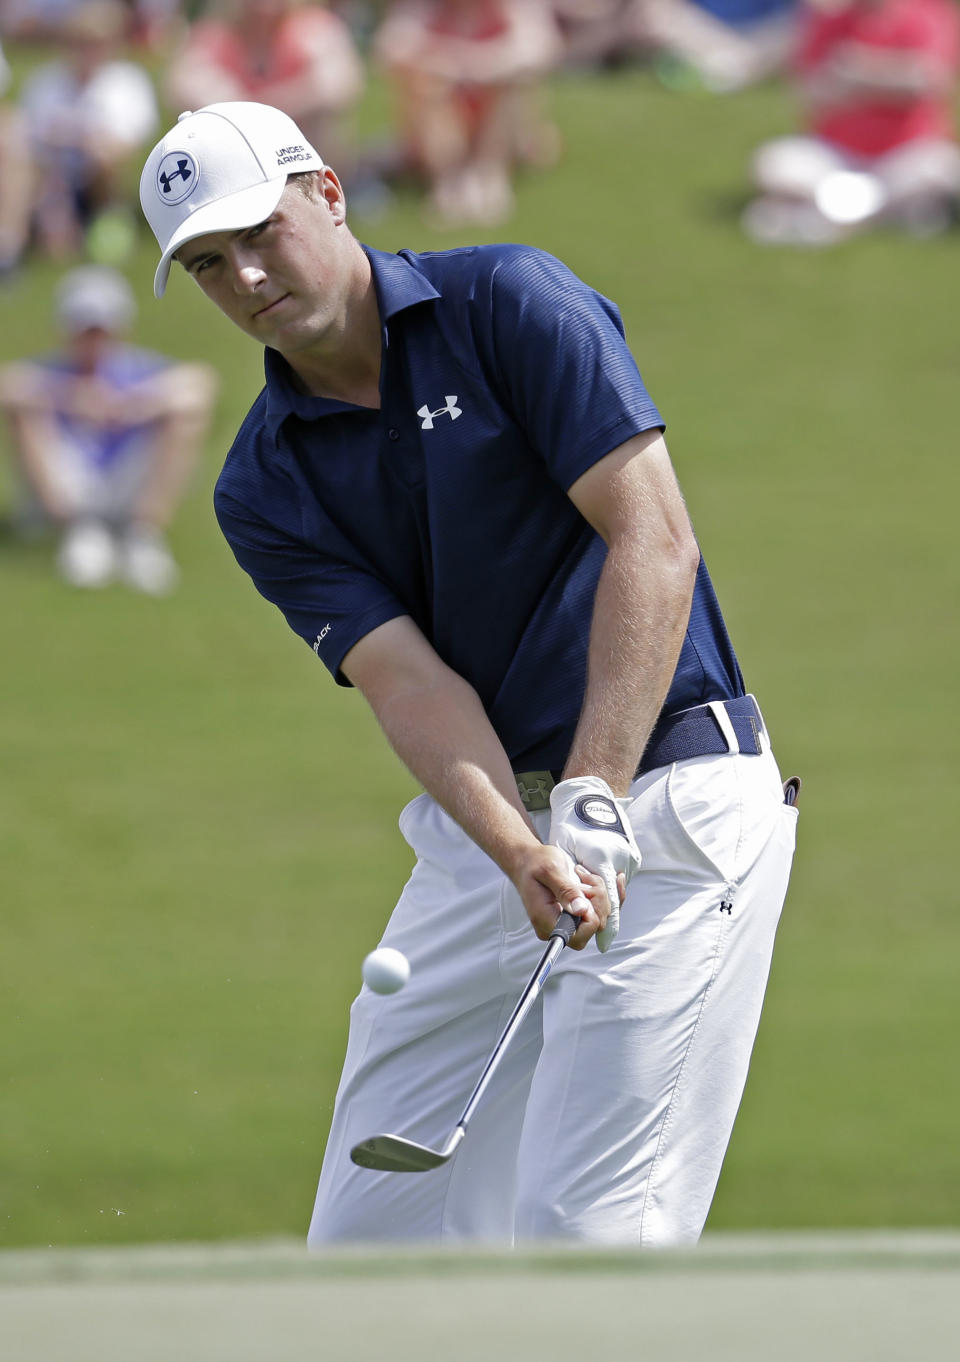 Jordan Spieth chips onto the third green during the third round of The Players championship golf tournament at TPC Sawgrass, Saturday, May 10, 2014, in Ponte Vedra Beach, Fla. (AP Photo/Lynne Sladky)